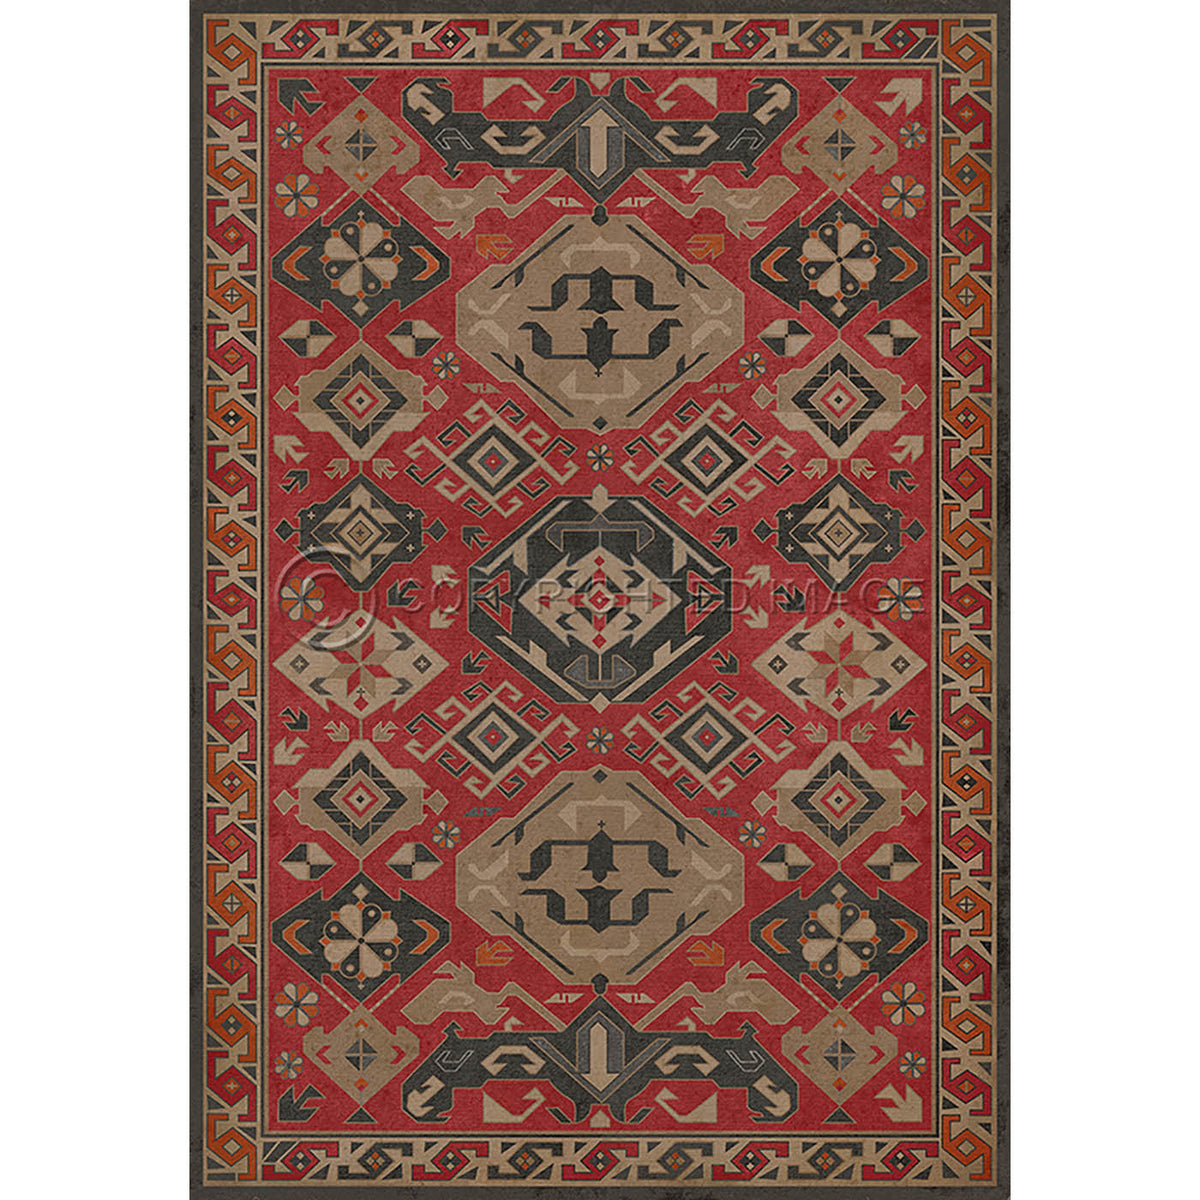 Traditional All Spice 52x76